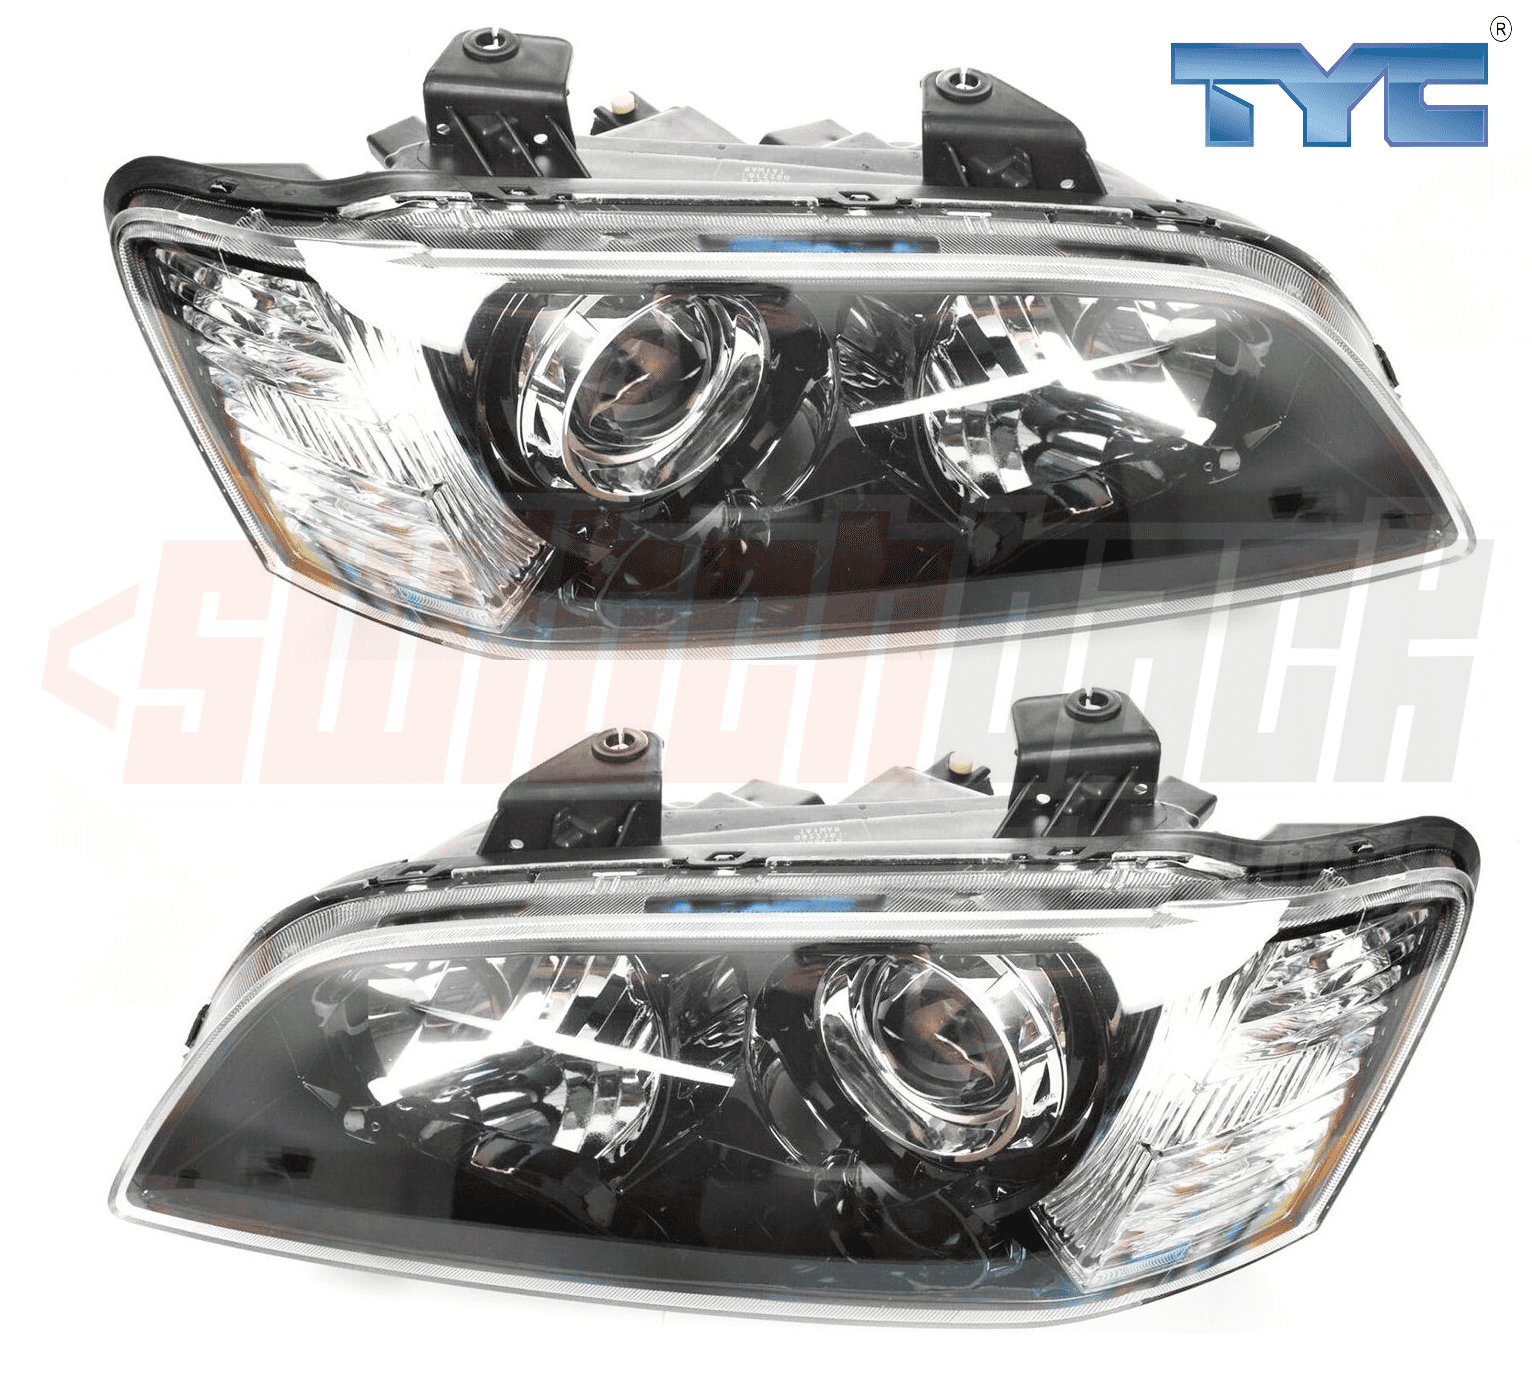 Projector Headlights - Black (VE SERIES 1 HSV E SERIES ONLY ...